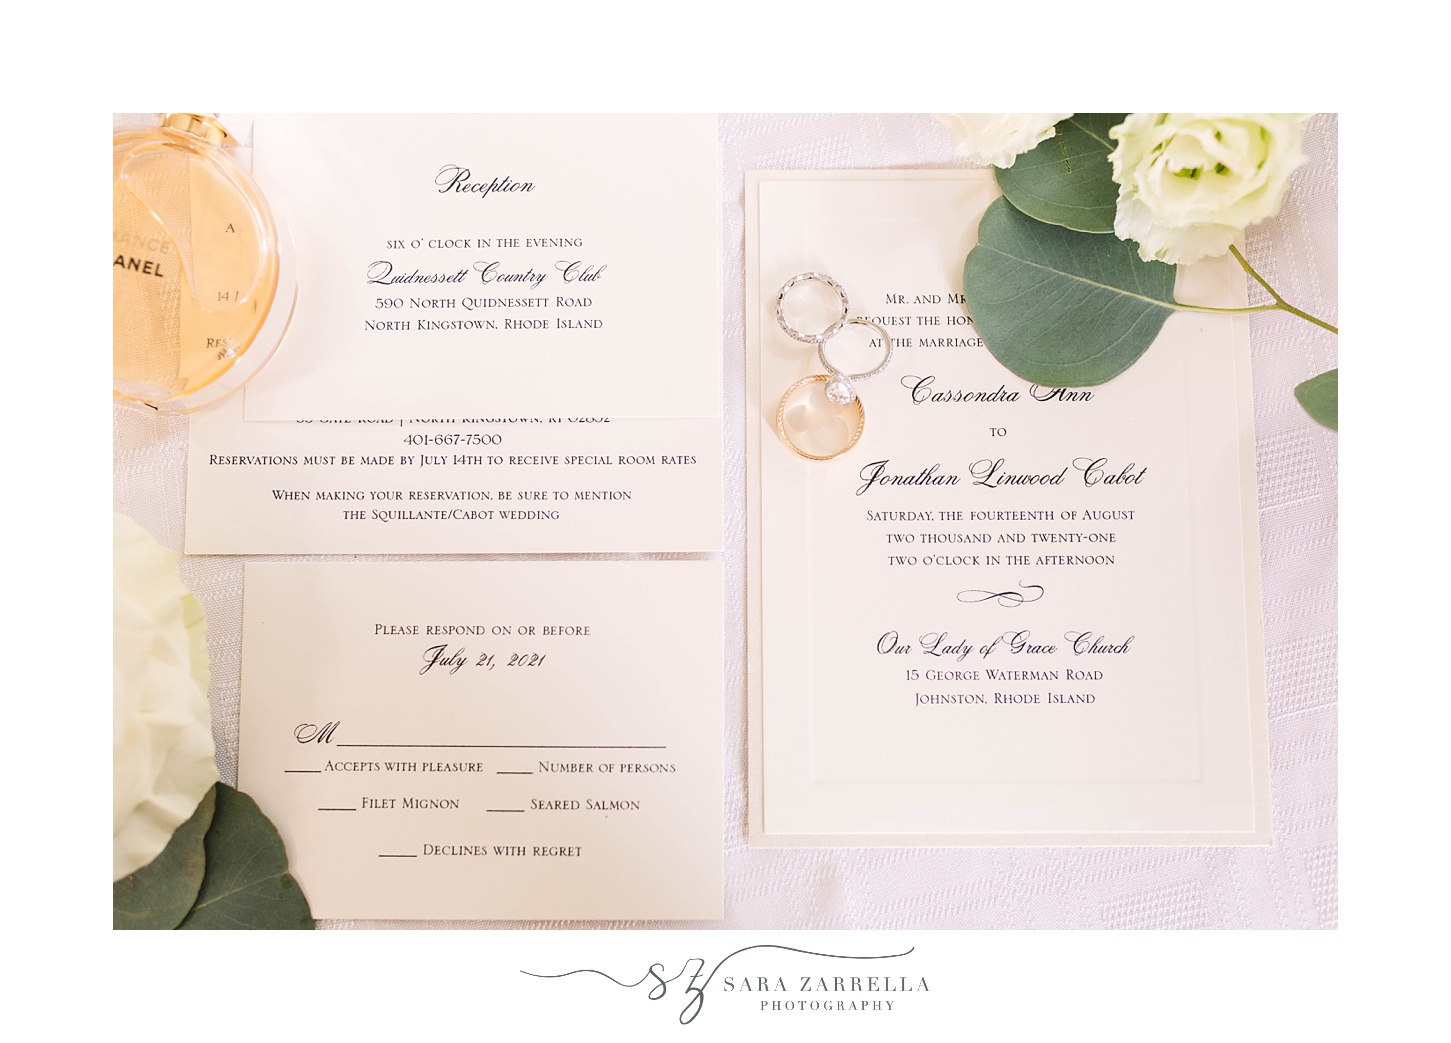 classic invitation suite for Rhode Island wedding day